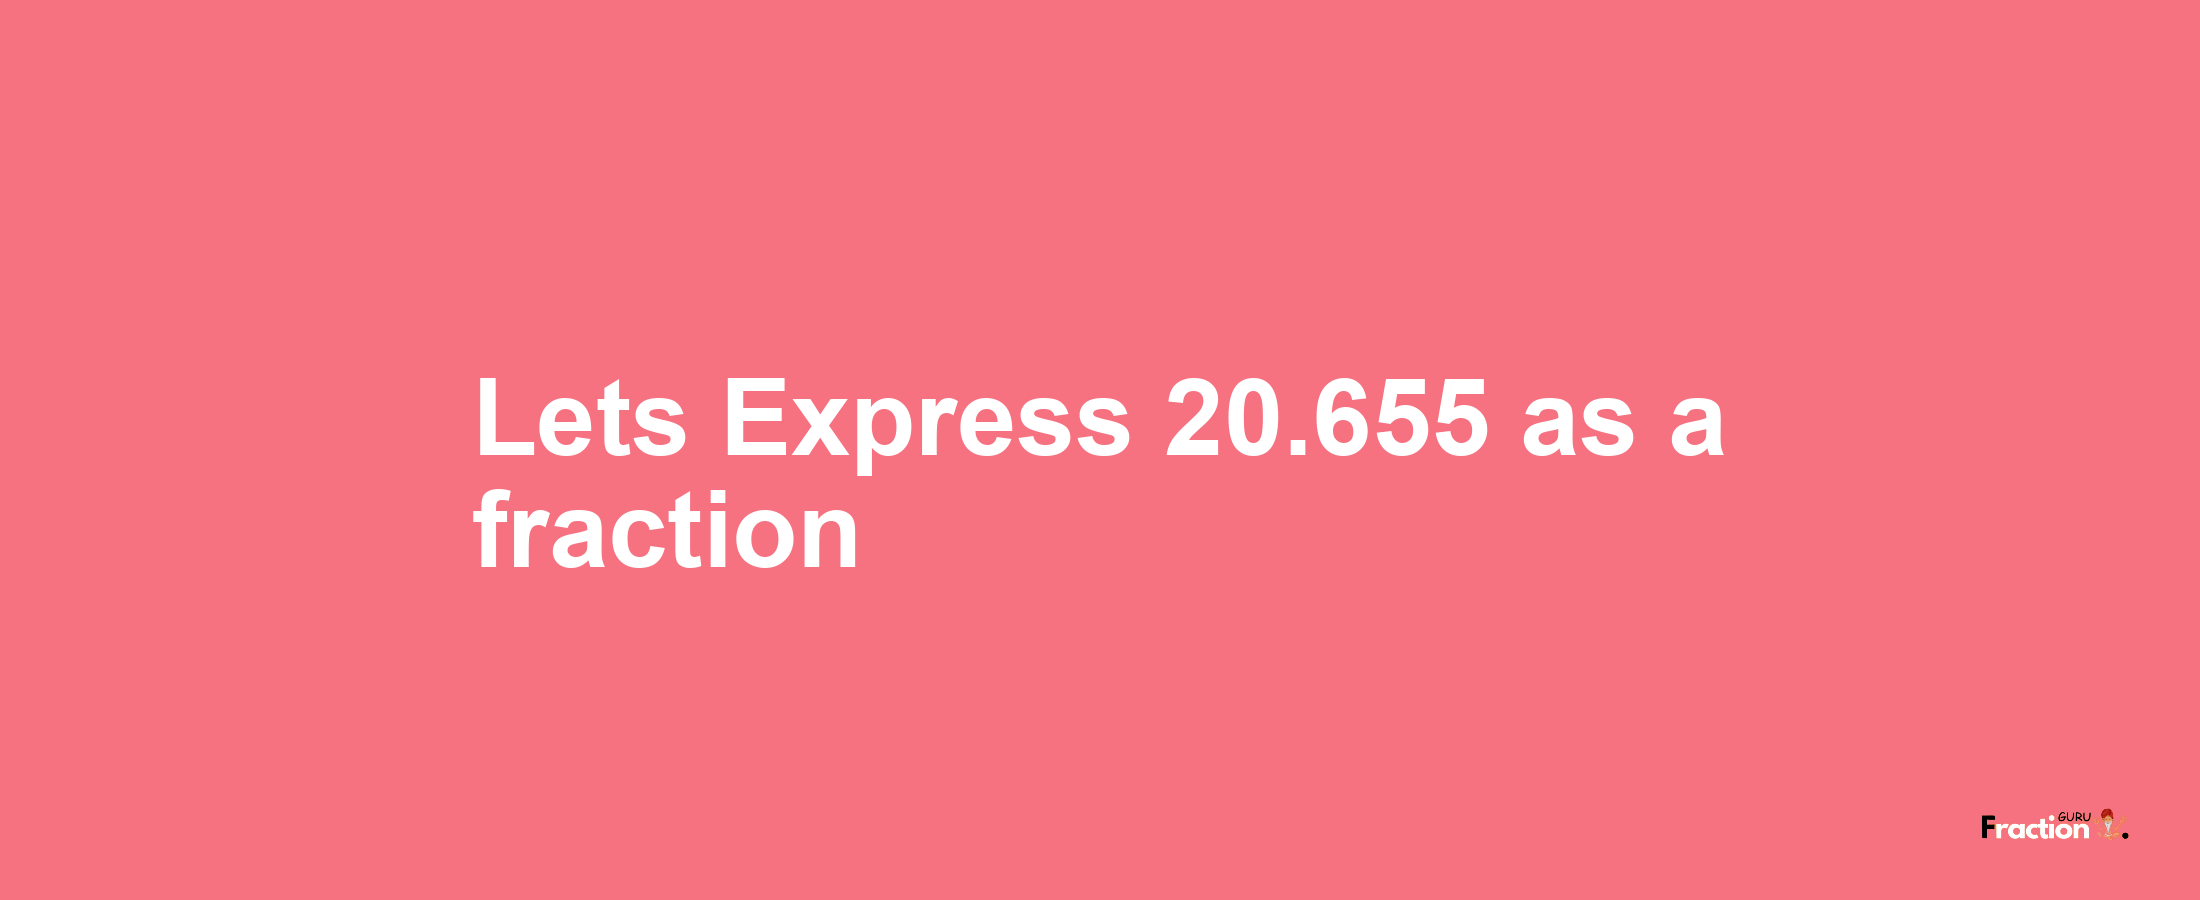 Lets Express 20.655 as afraction